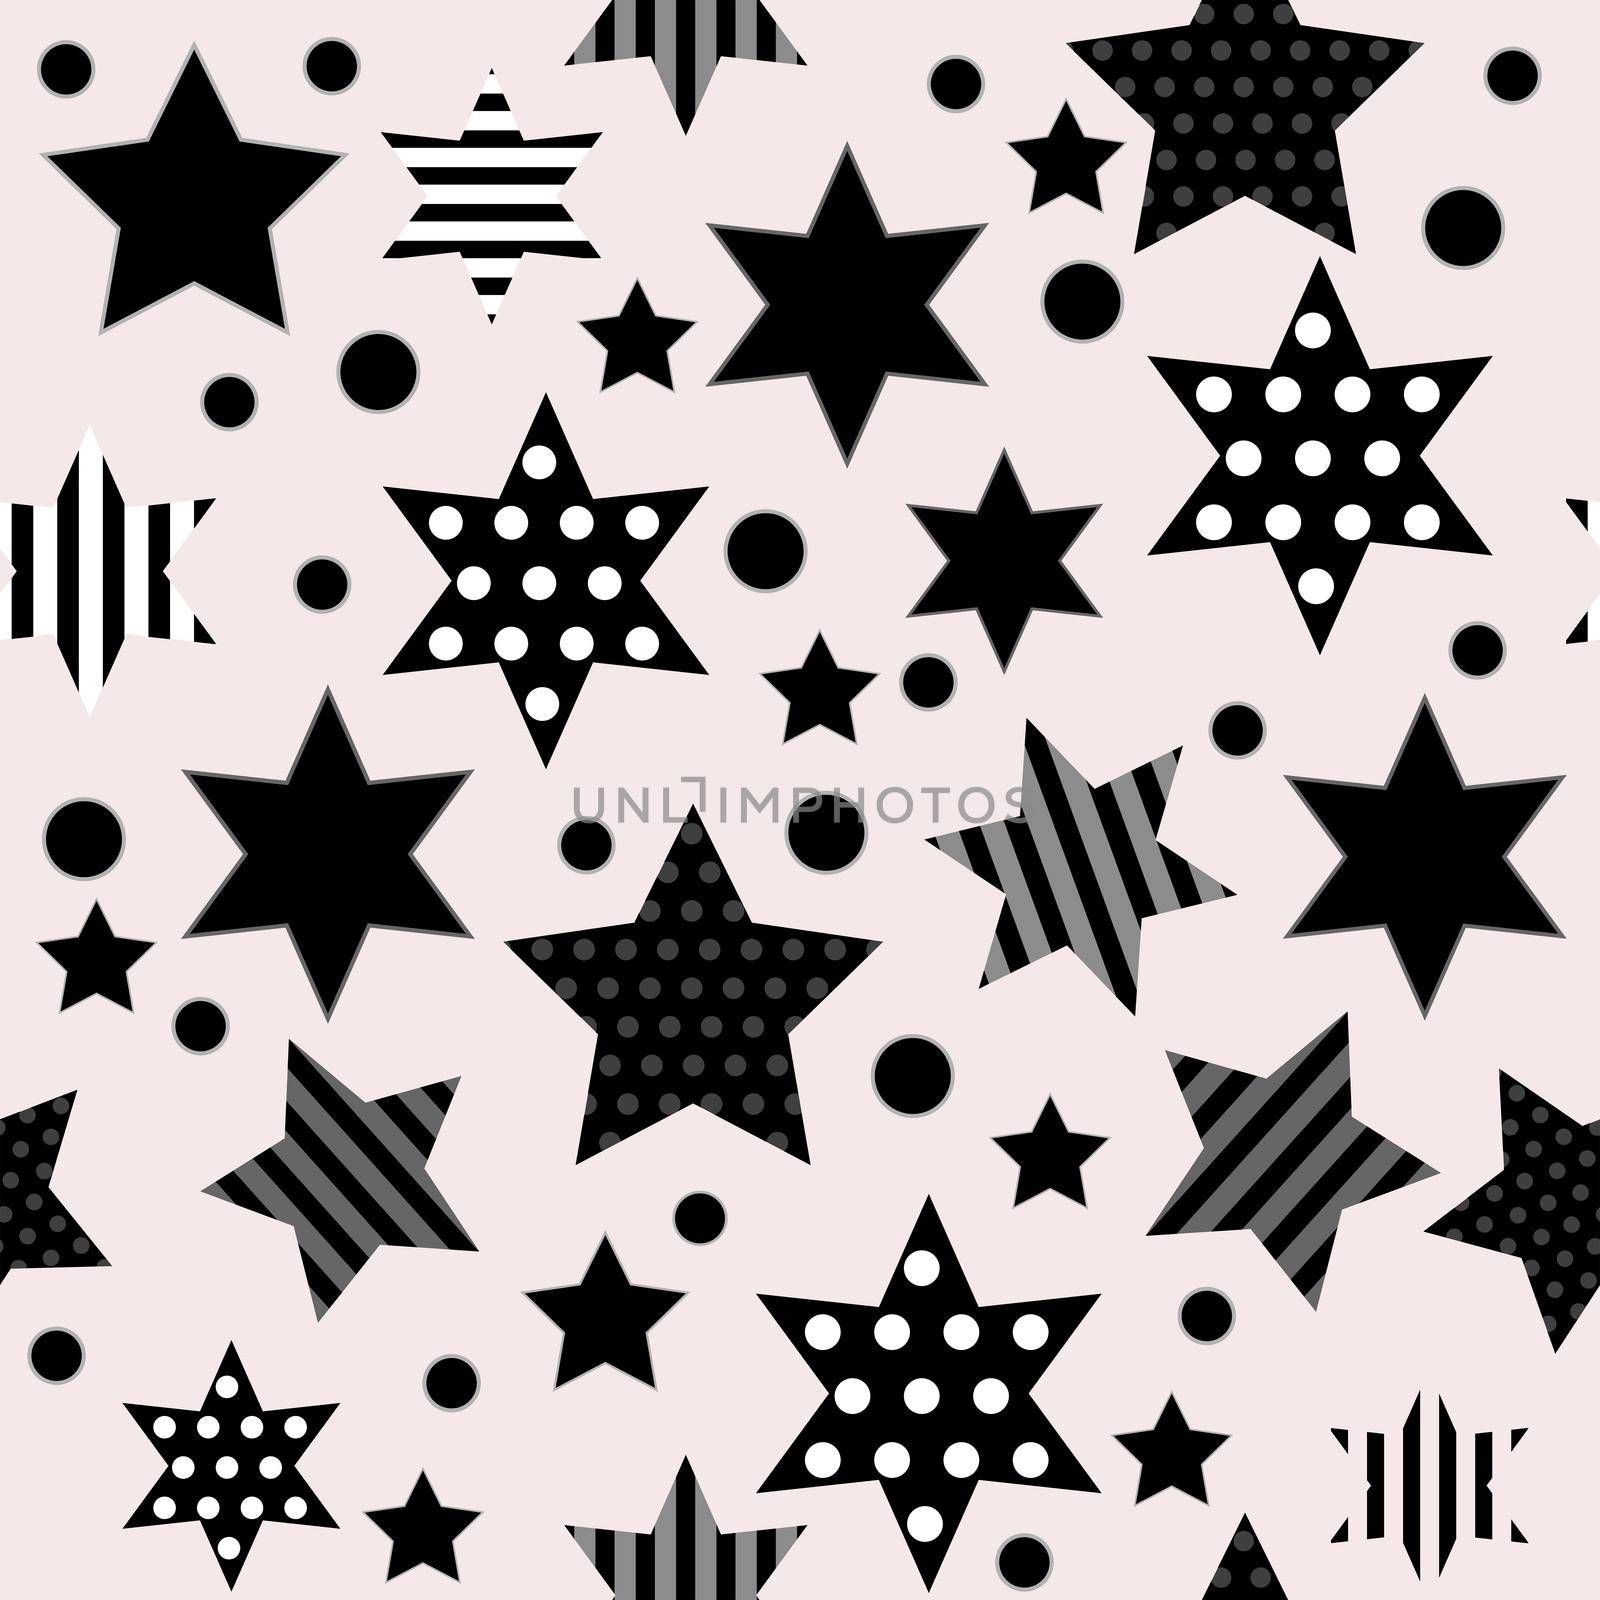 Abstract seamless background with star shapes and dots by hibrida13